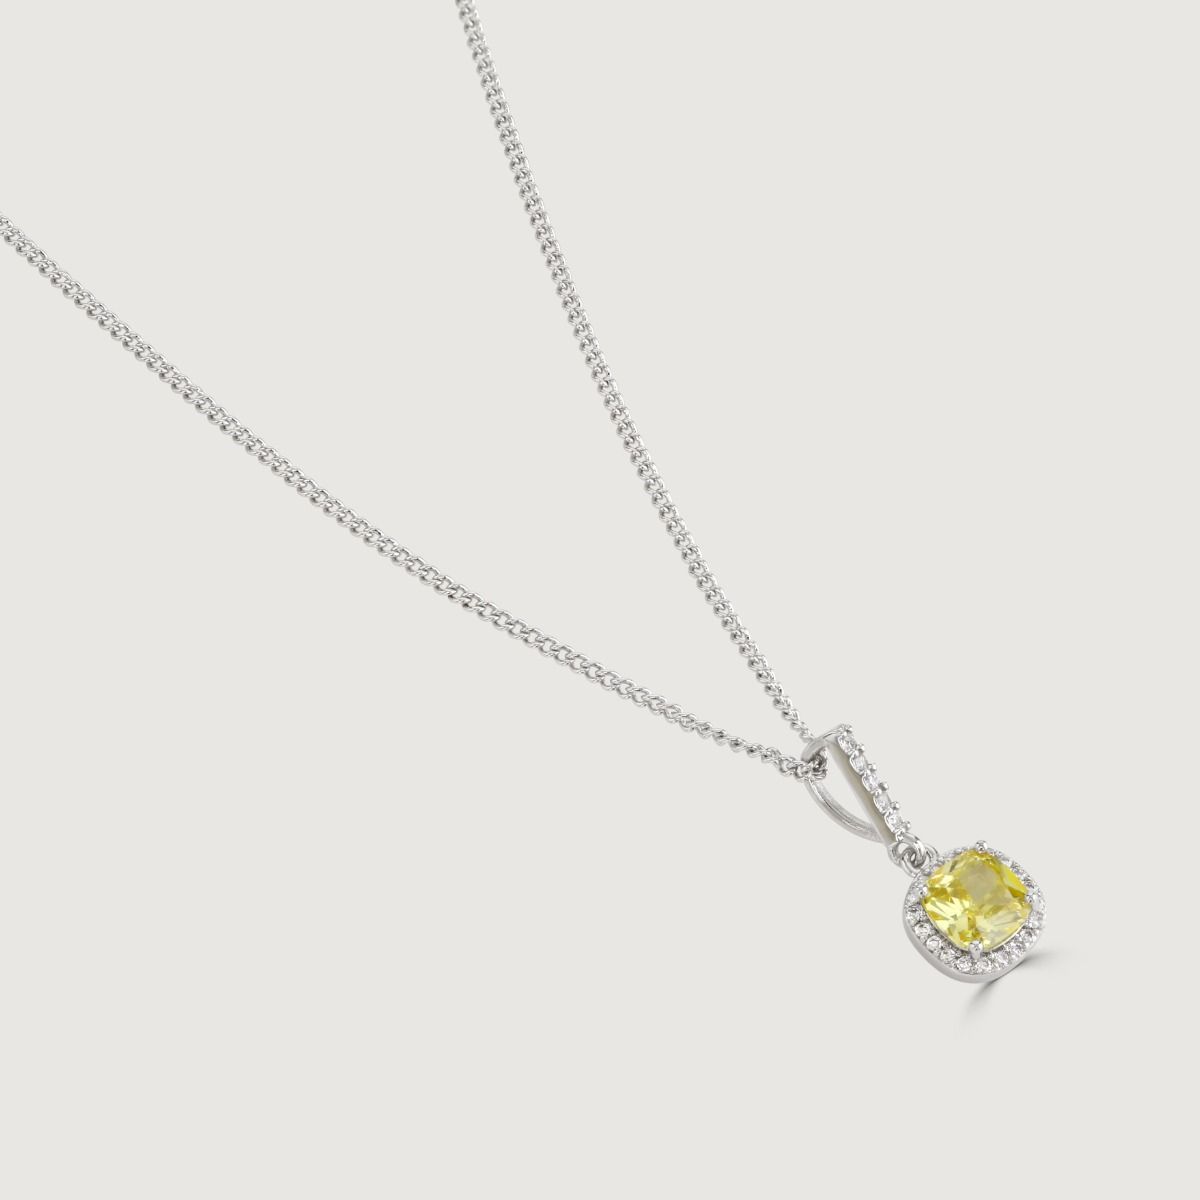 The Canary Cushion Drop Pendant is a enrapturing piece. Impeccably shaped cubic zirconia stones encircle a yellow diamond cushion cut centre, exuding a mesmerising allure.